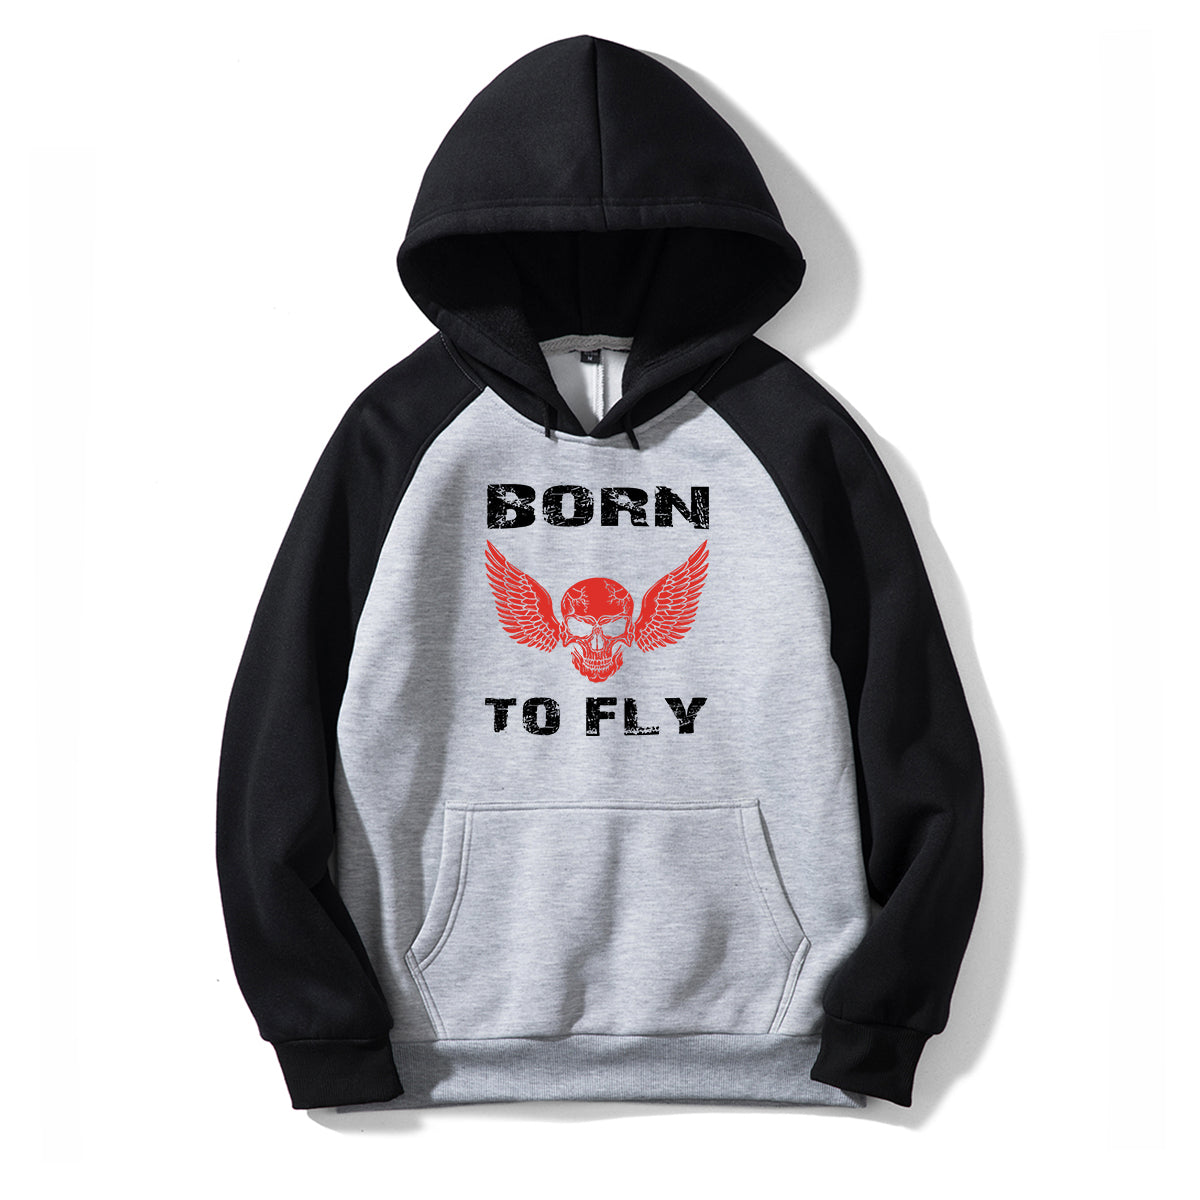 Born To Fly SKELETON Designed Colourful Hoodies